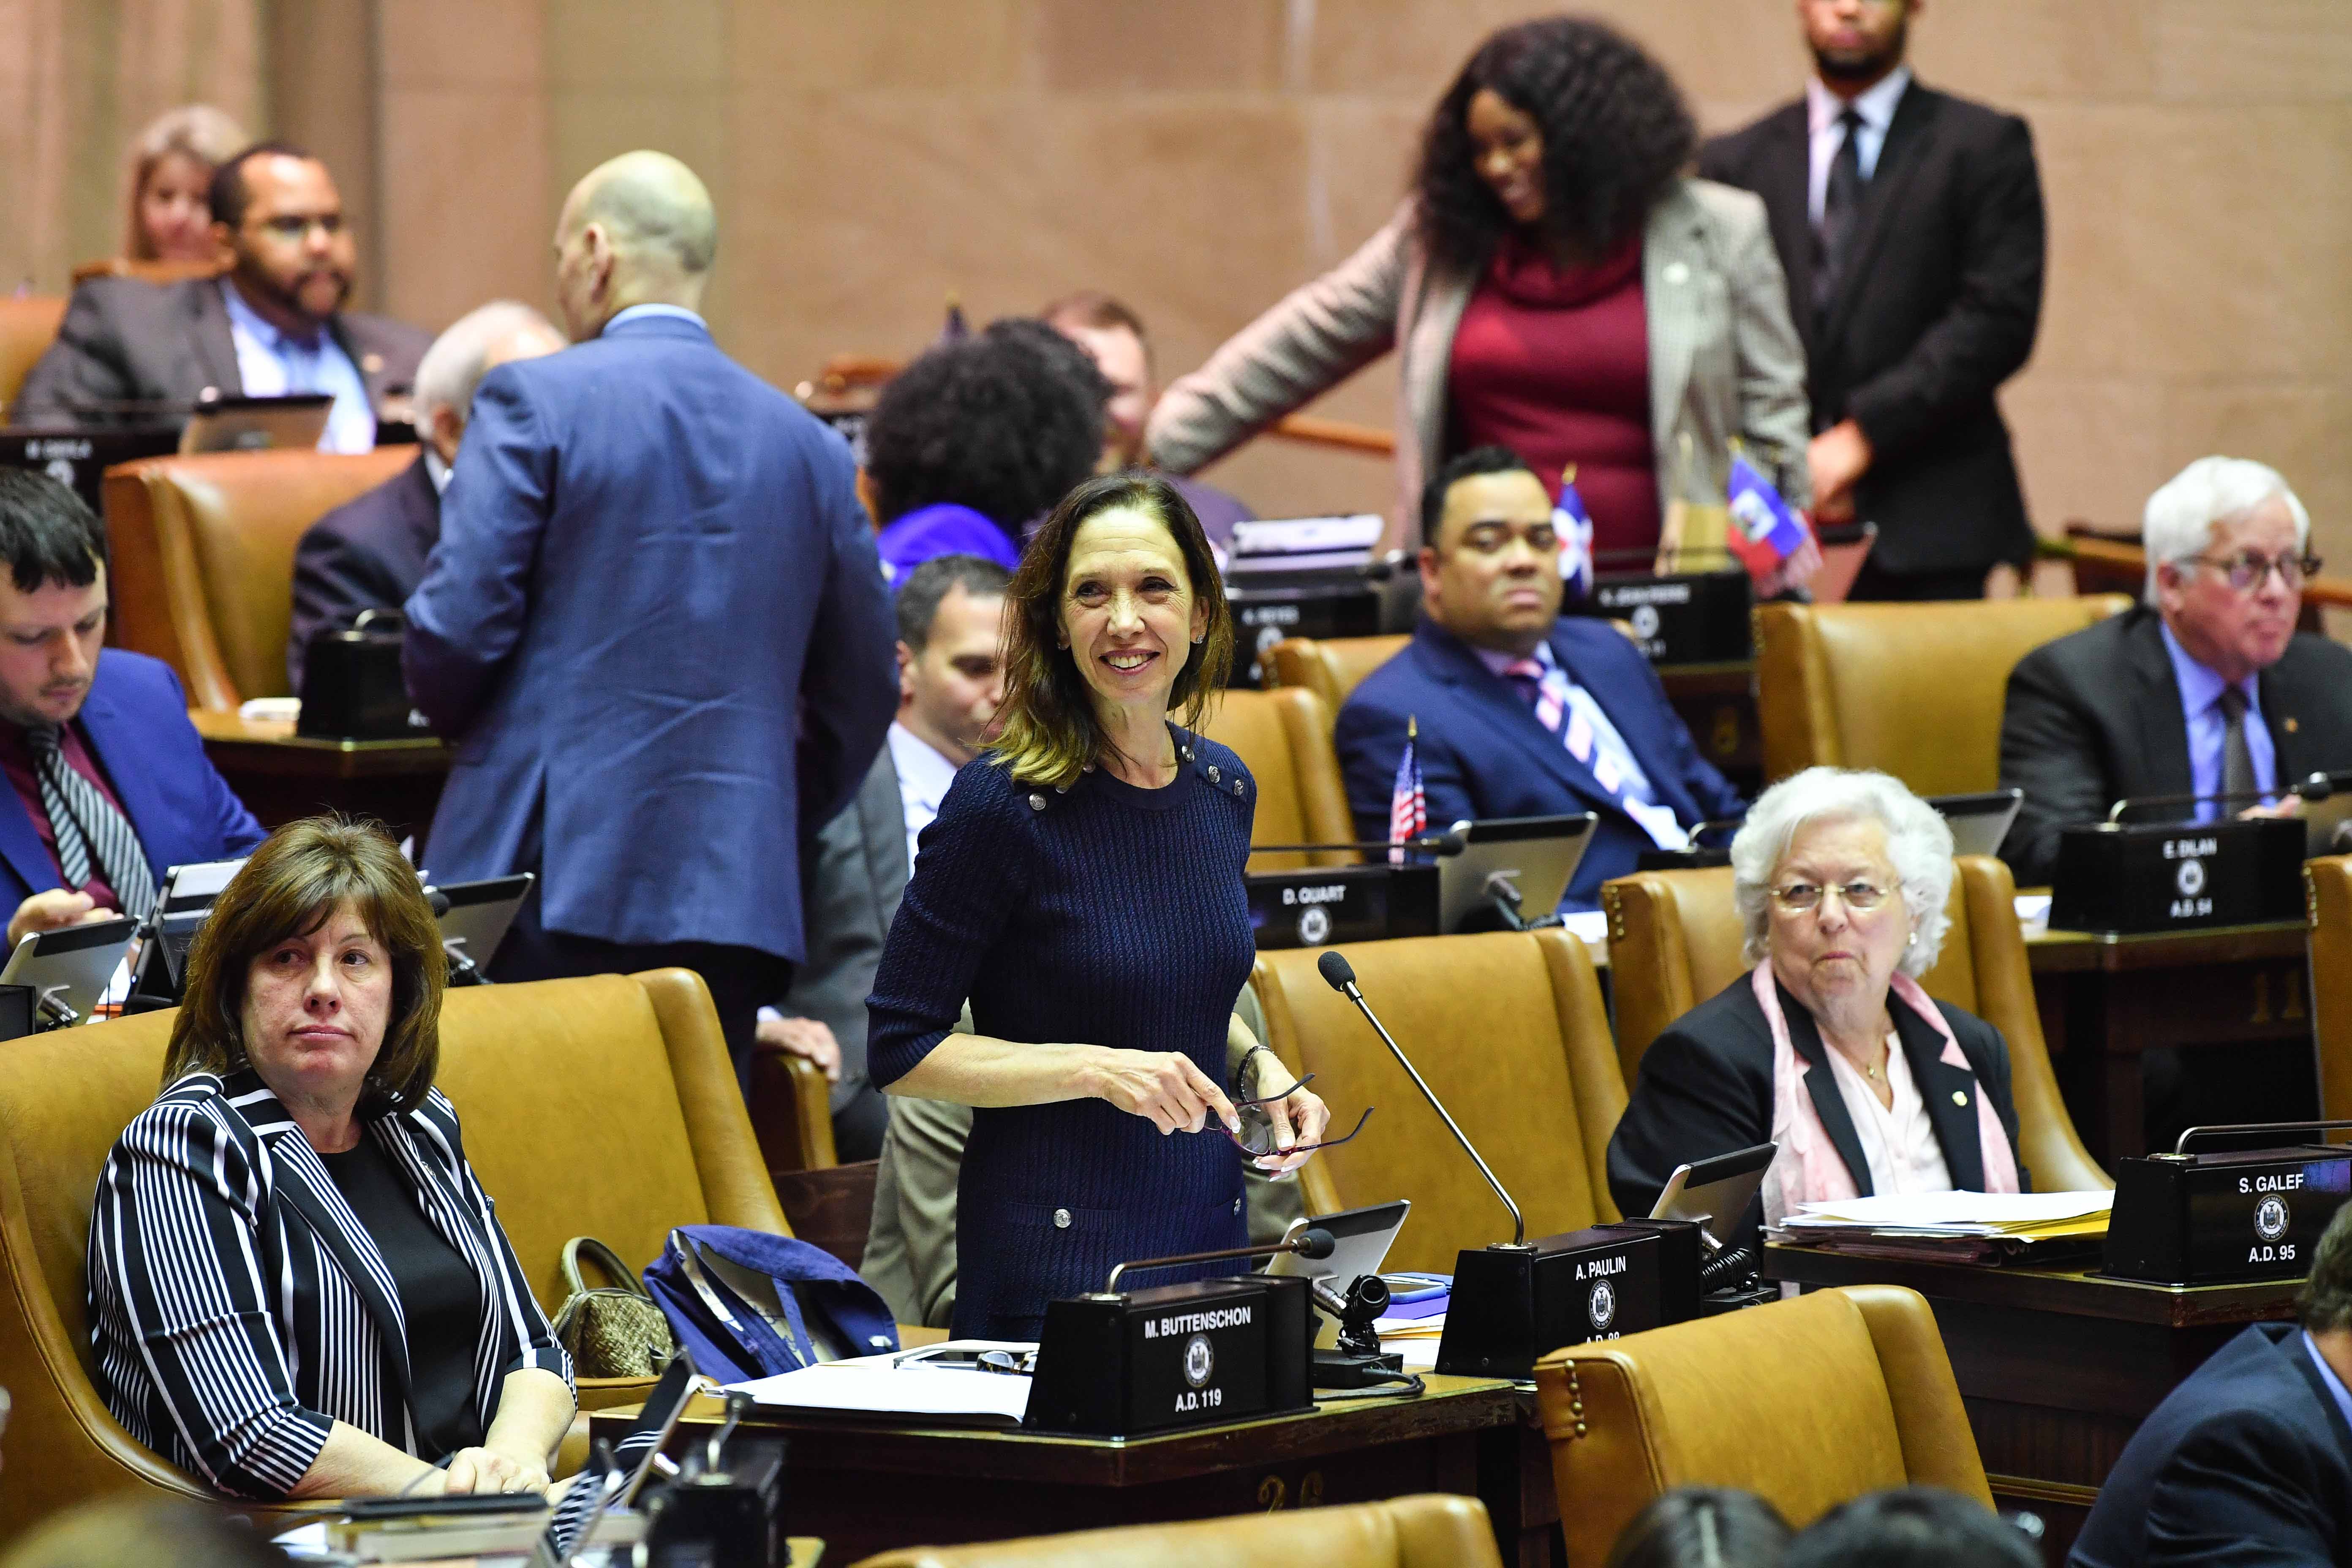 Amy Paulin during a debate on the floor of the New York State Assembly.